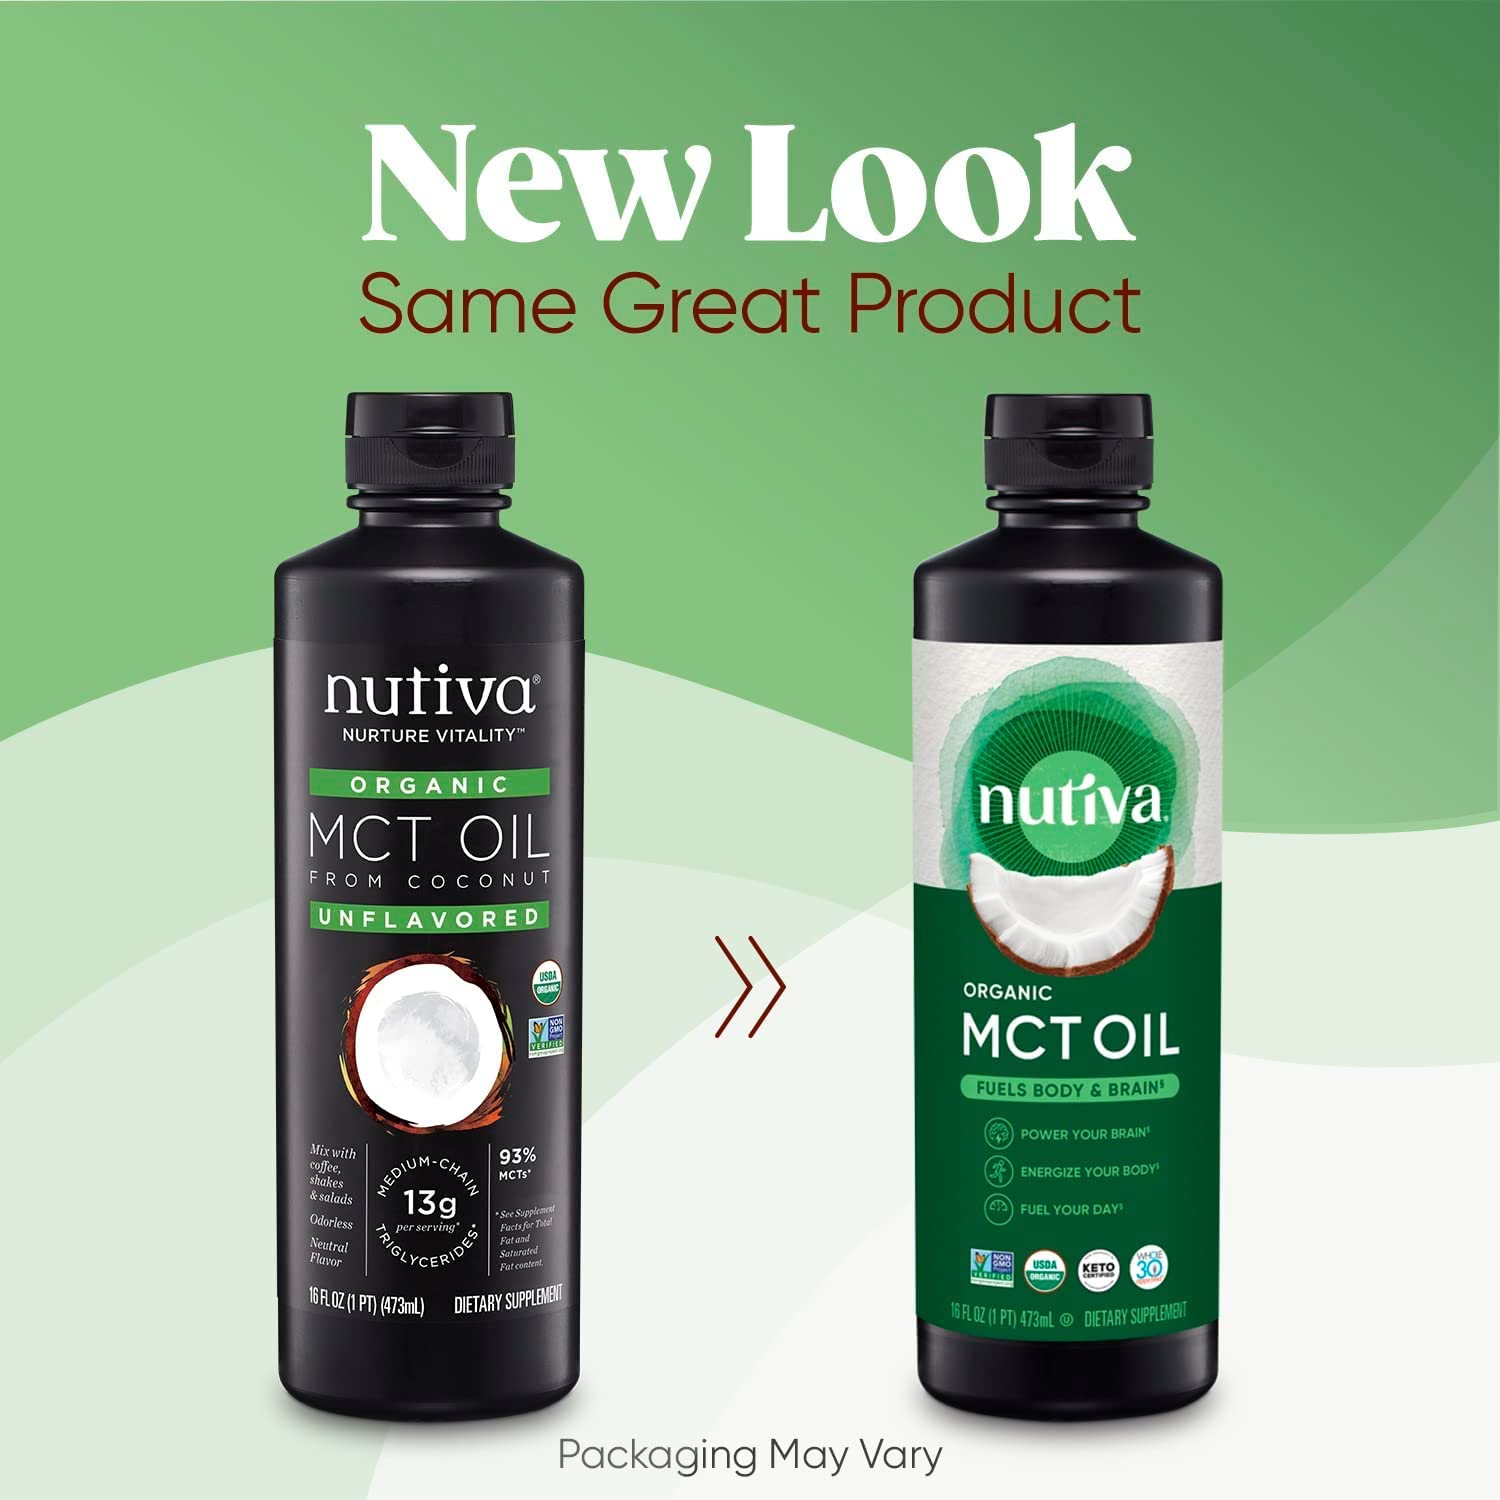 Nutiva Organic MCT Oil, 16 fl oz, Unflavored for Keto Coffee, Non-GMO Oil made from Organic Coconuts, Keto Friendly, Best MCT Oil Wellness Ketosis Supplement, 14g of C8 & C10 per serving